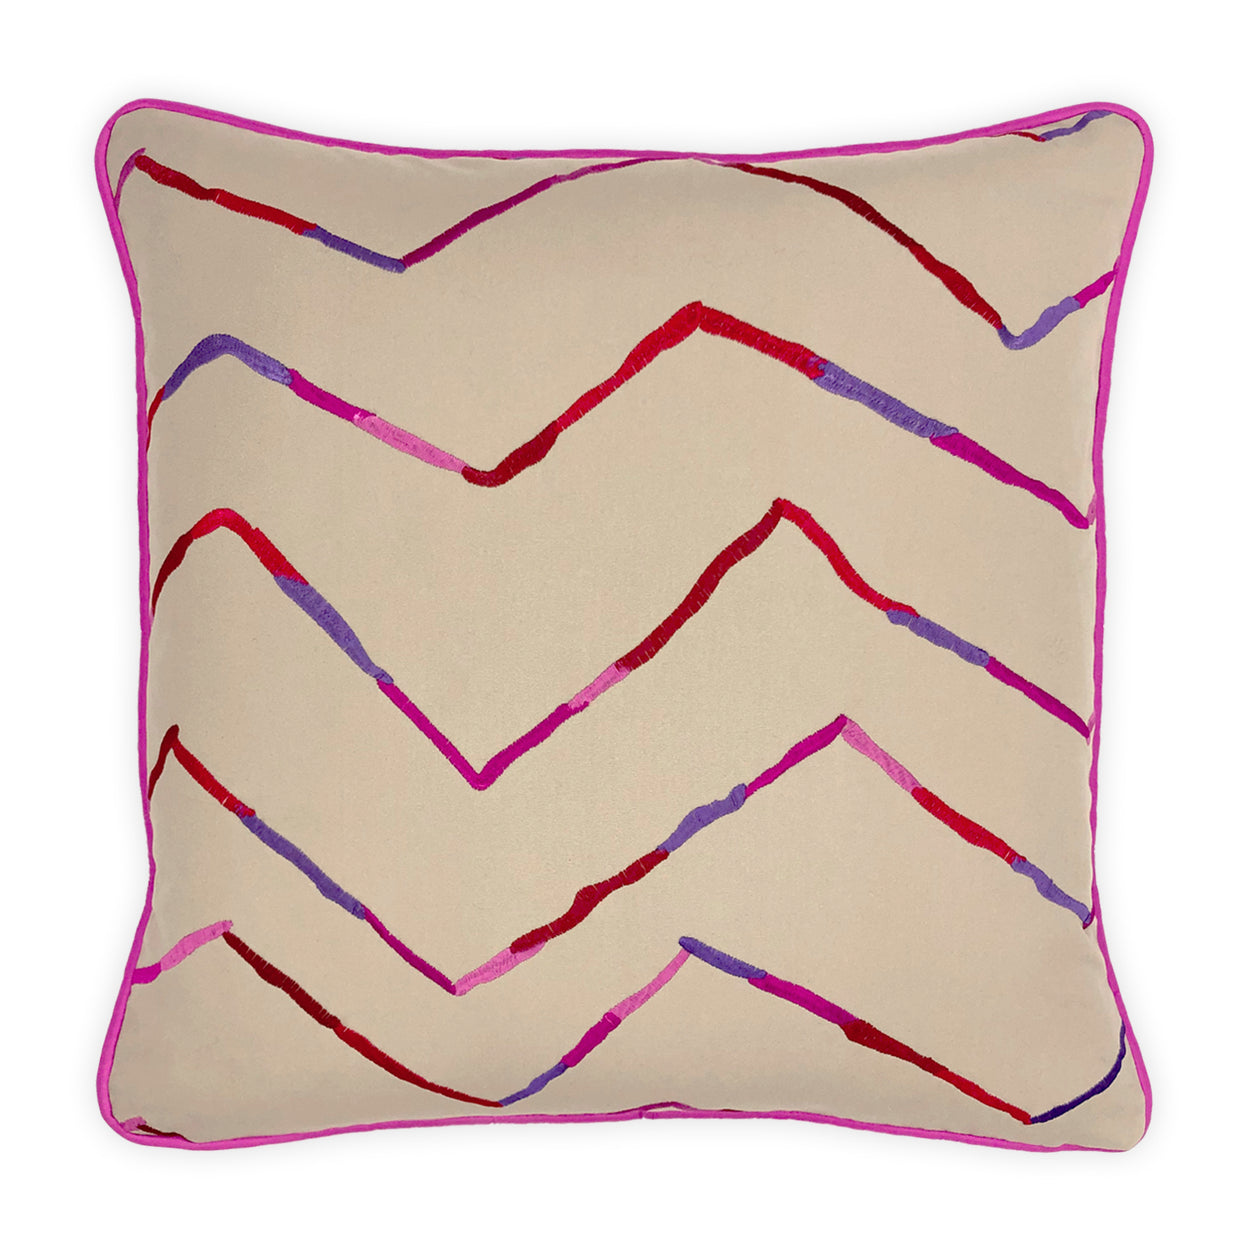 VIEW ALL STRIPED CUSHIONS